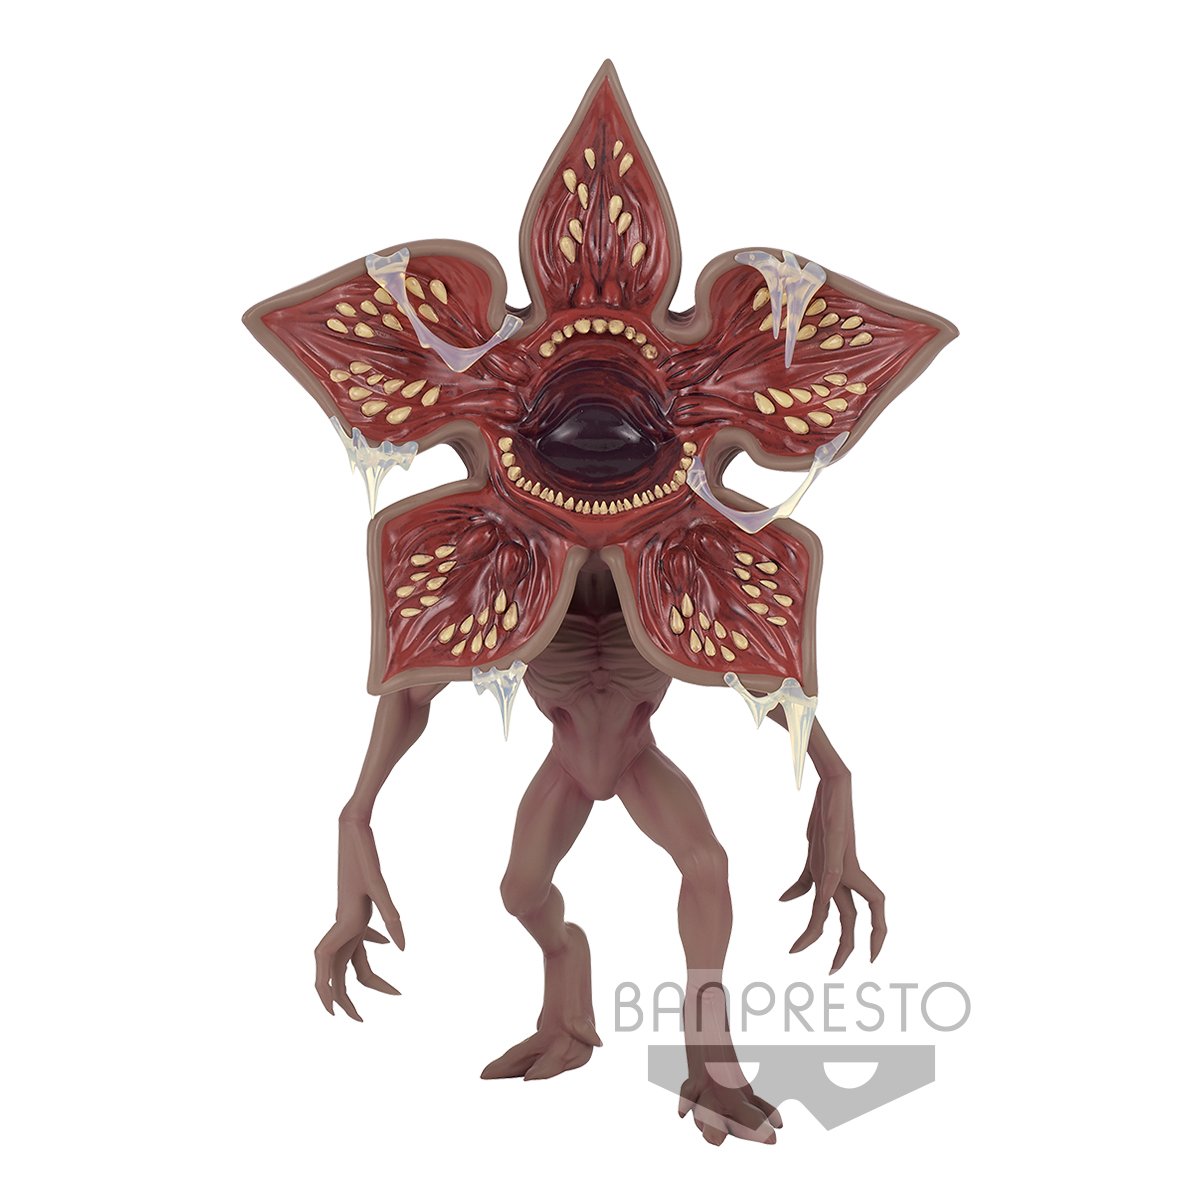 Stranger Things Q Posket Extra "Demogorgon"-Bandai-Ace Cards & Collectibles